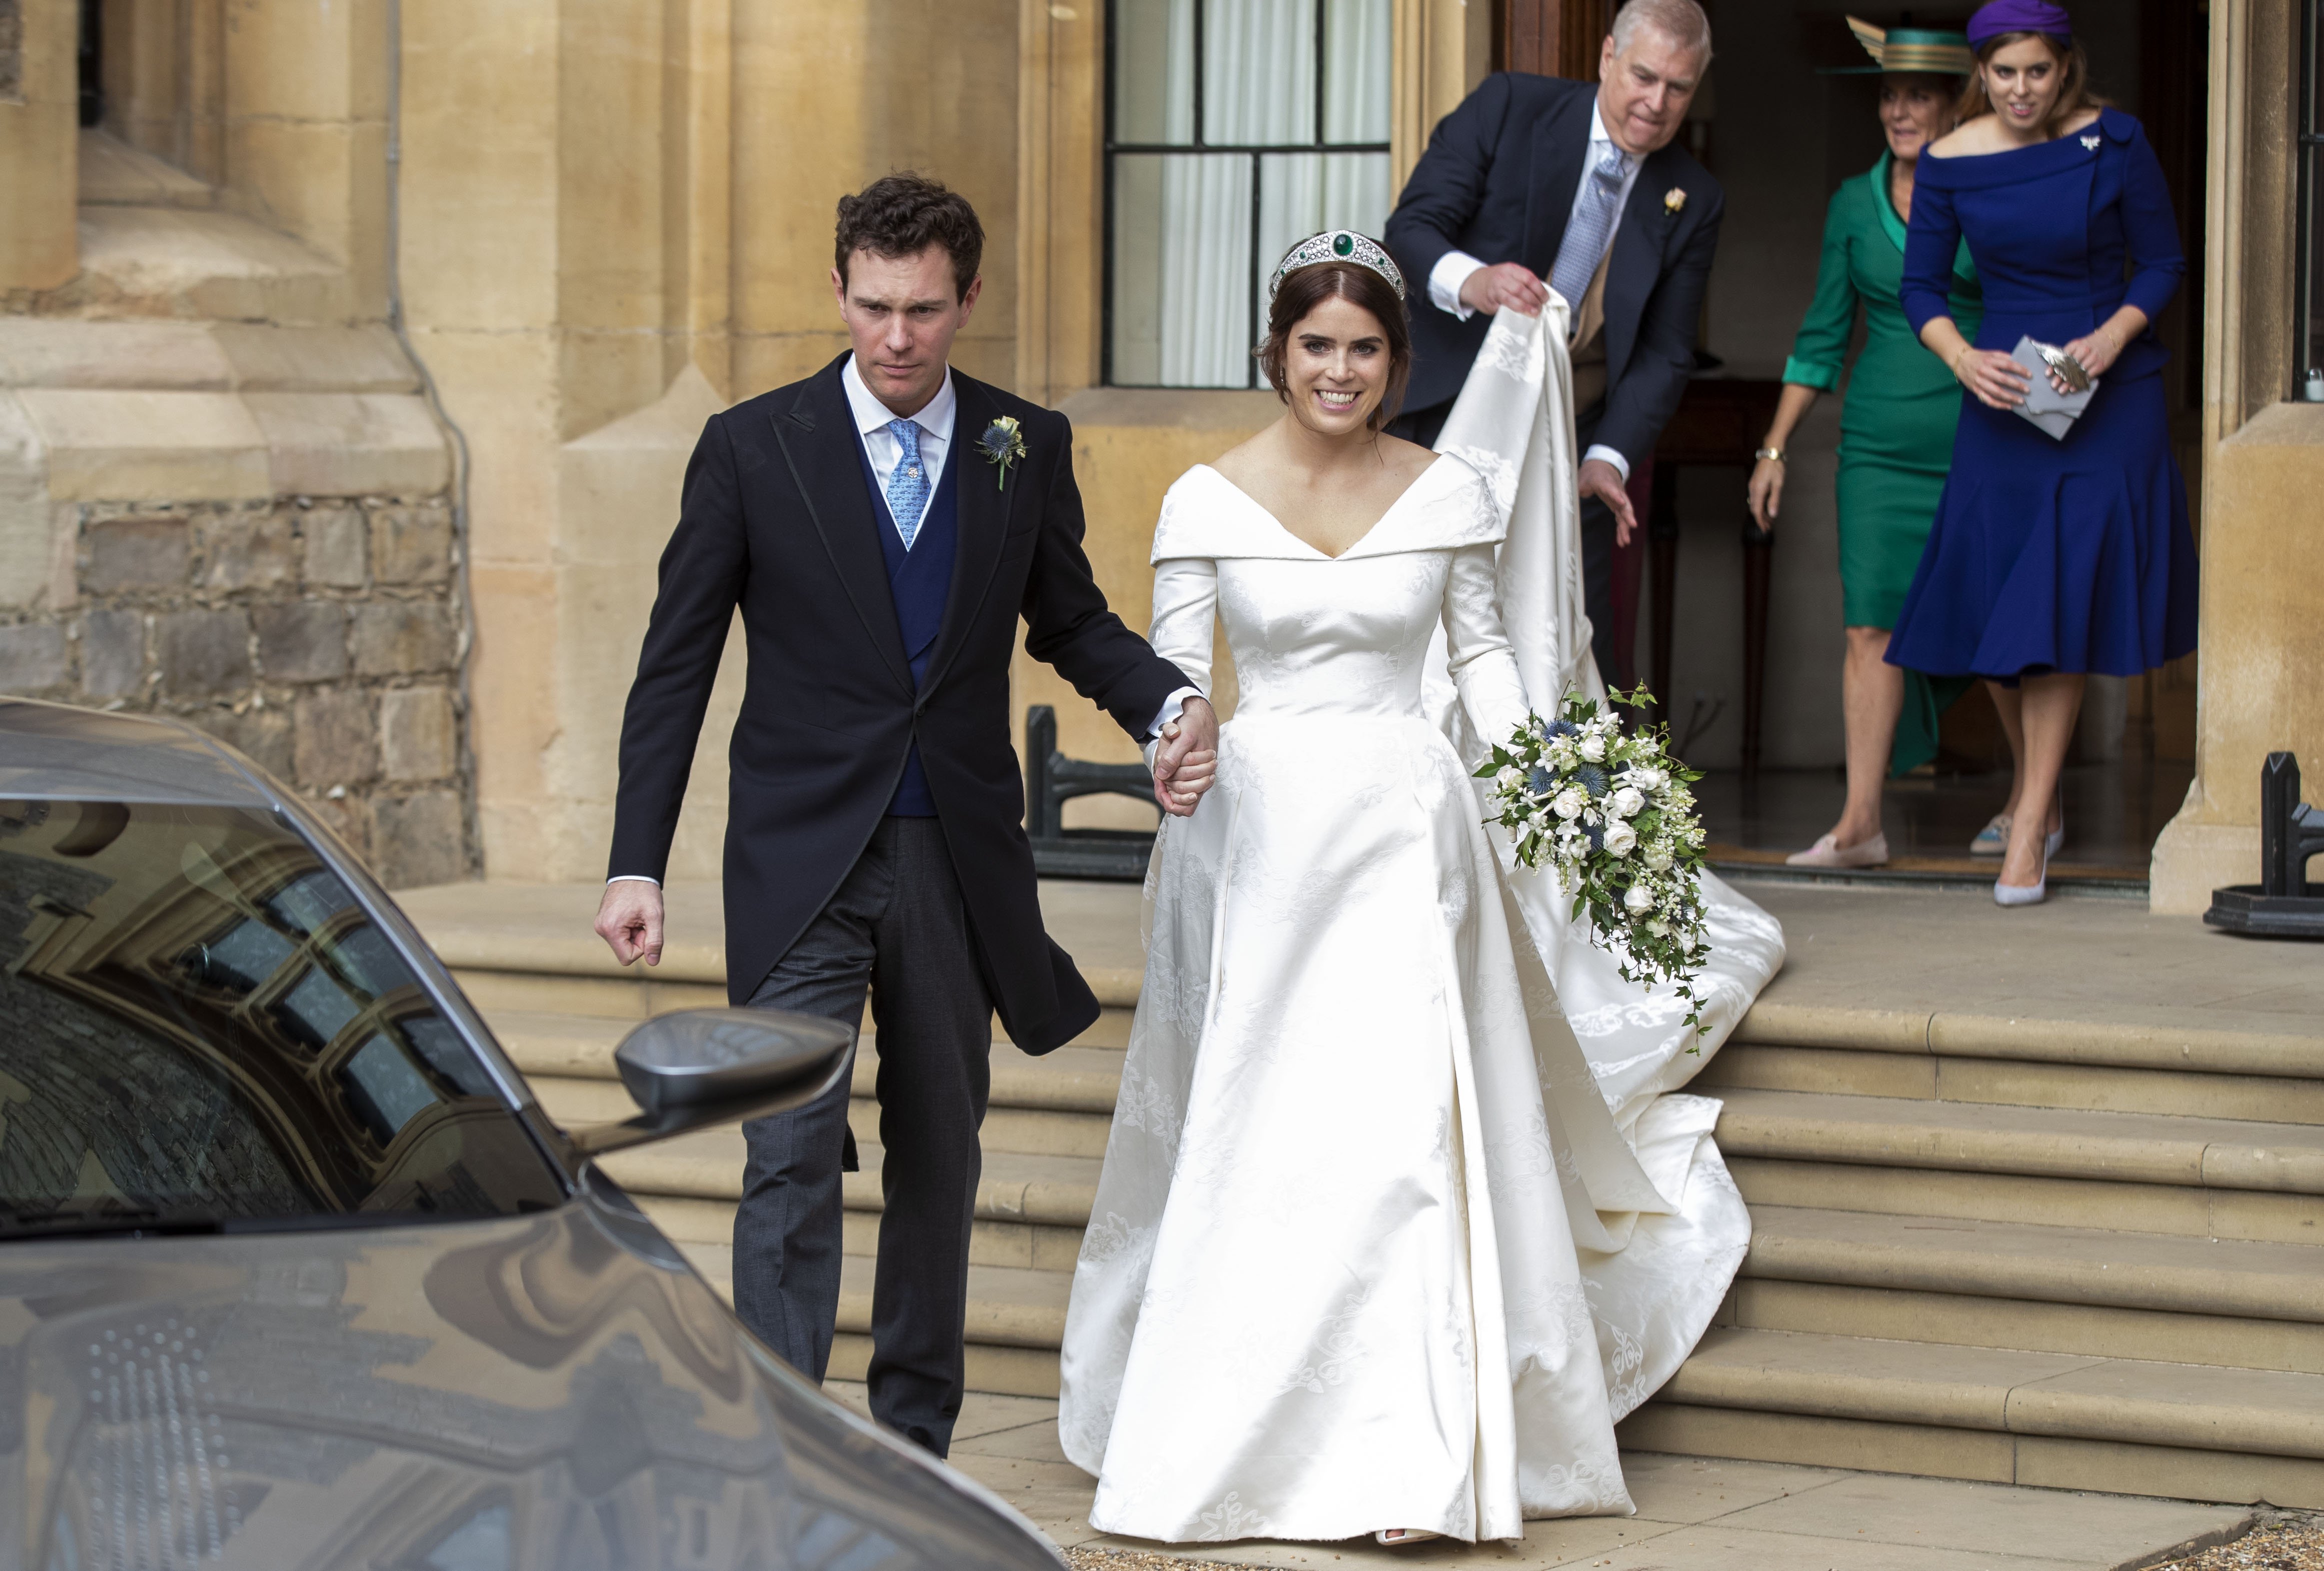 Princess Eugenie and Jack Brooksbank helped by Princess Beatrice and Prince Andrew, Duke of York leave Windsor Castle in an Aston Martin DB10 after their wedding for an evening reception at Royal Lodge on October 12, 2018 in Windsor, England. | Source: Getty Images